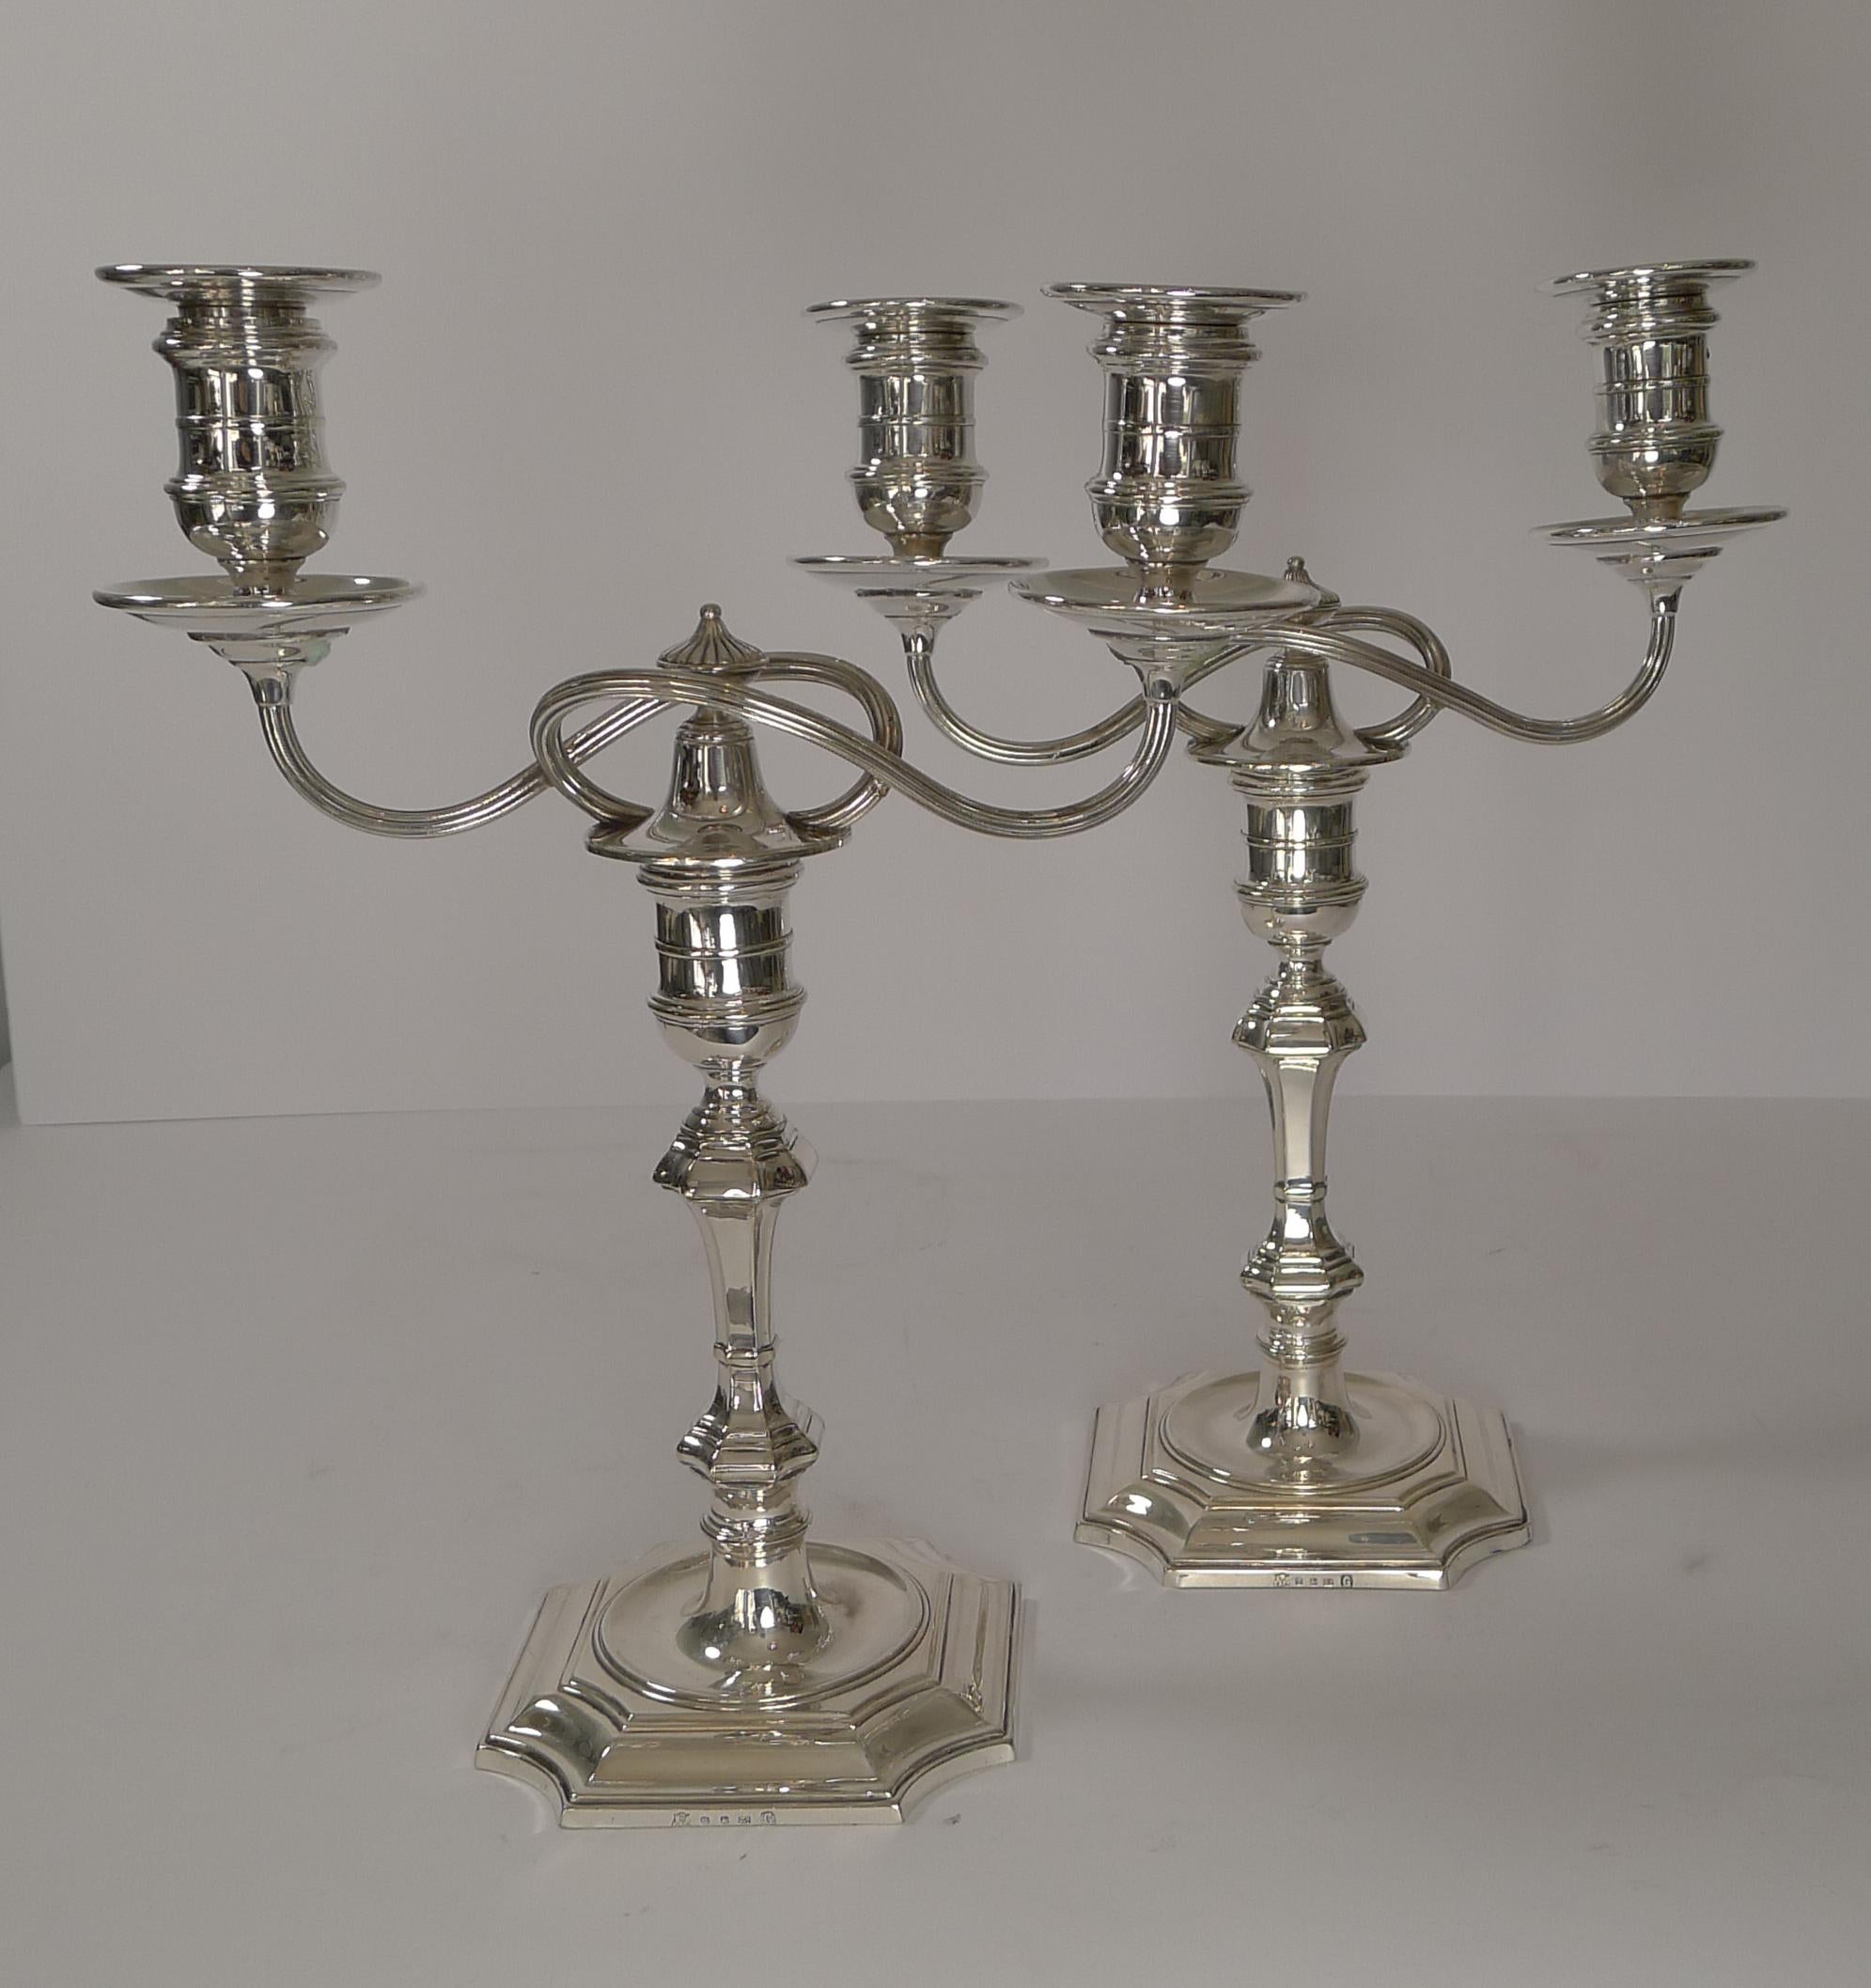 A fabulous small pair of Victorian two-light candelabra made by the top notch silversmith, Elkington and Co.

The two arms can be removed if desired, two drip trays removed and placed in the bases to create a lovely small pair of